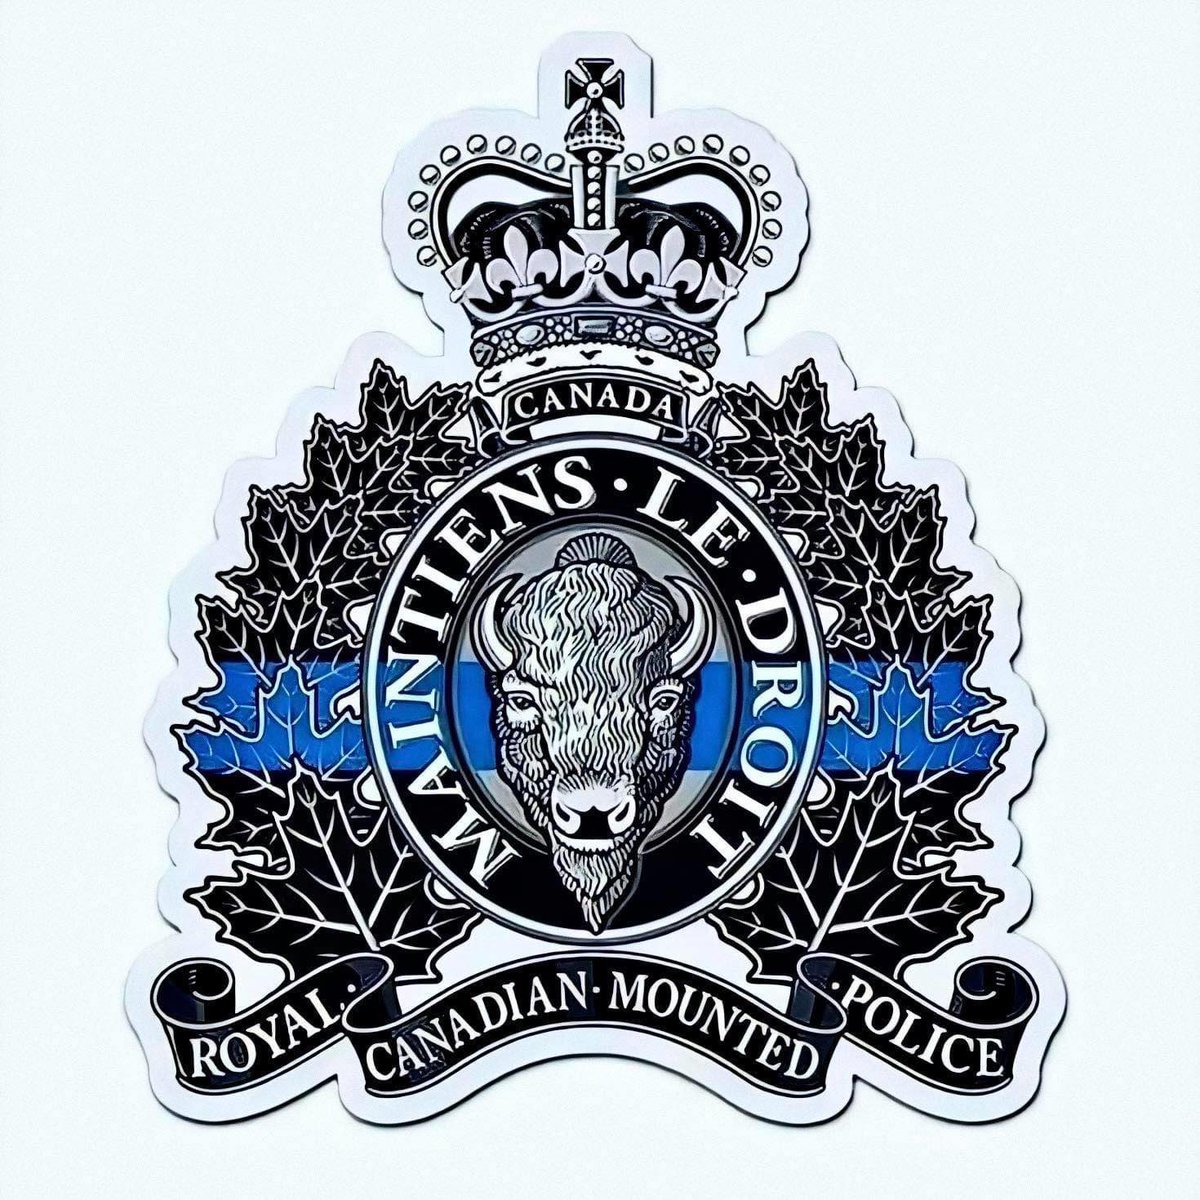 Another senseless tragedy. Rest in Peace Rick. #rcmp #police